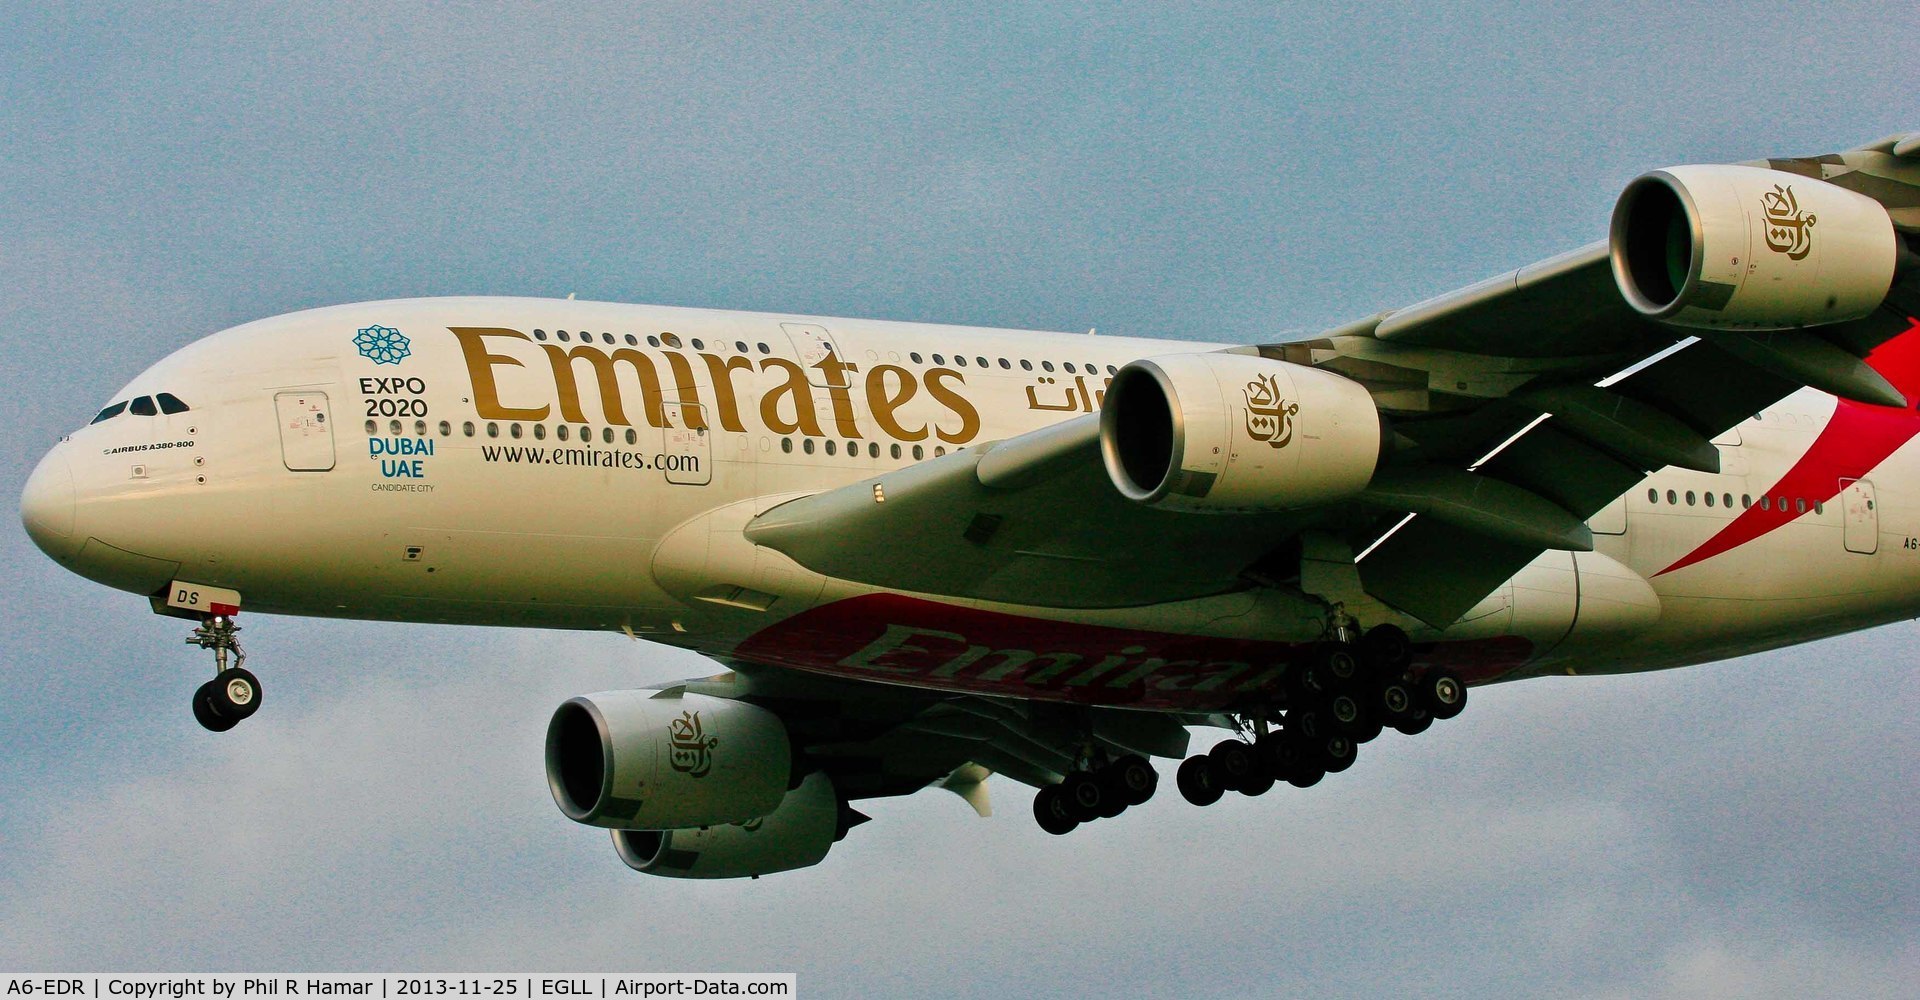 A6-EDR, 2011 Airbus A380-861 C/N 083, Emirates Airlines, (A6-EDR) 2011 Airbus A380-861, c/n 083, on approach to land on 27L Heathrow. © PhilRHama